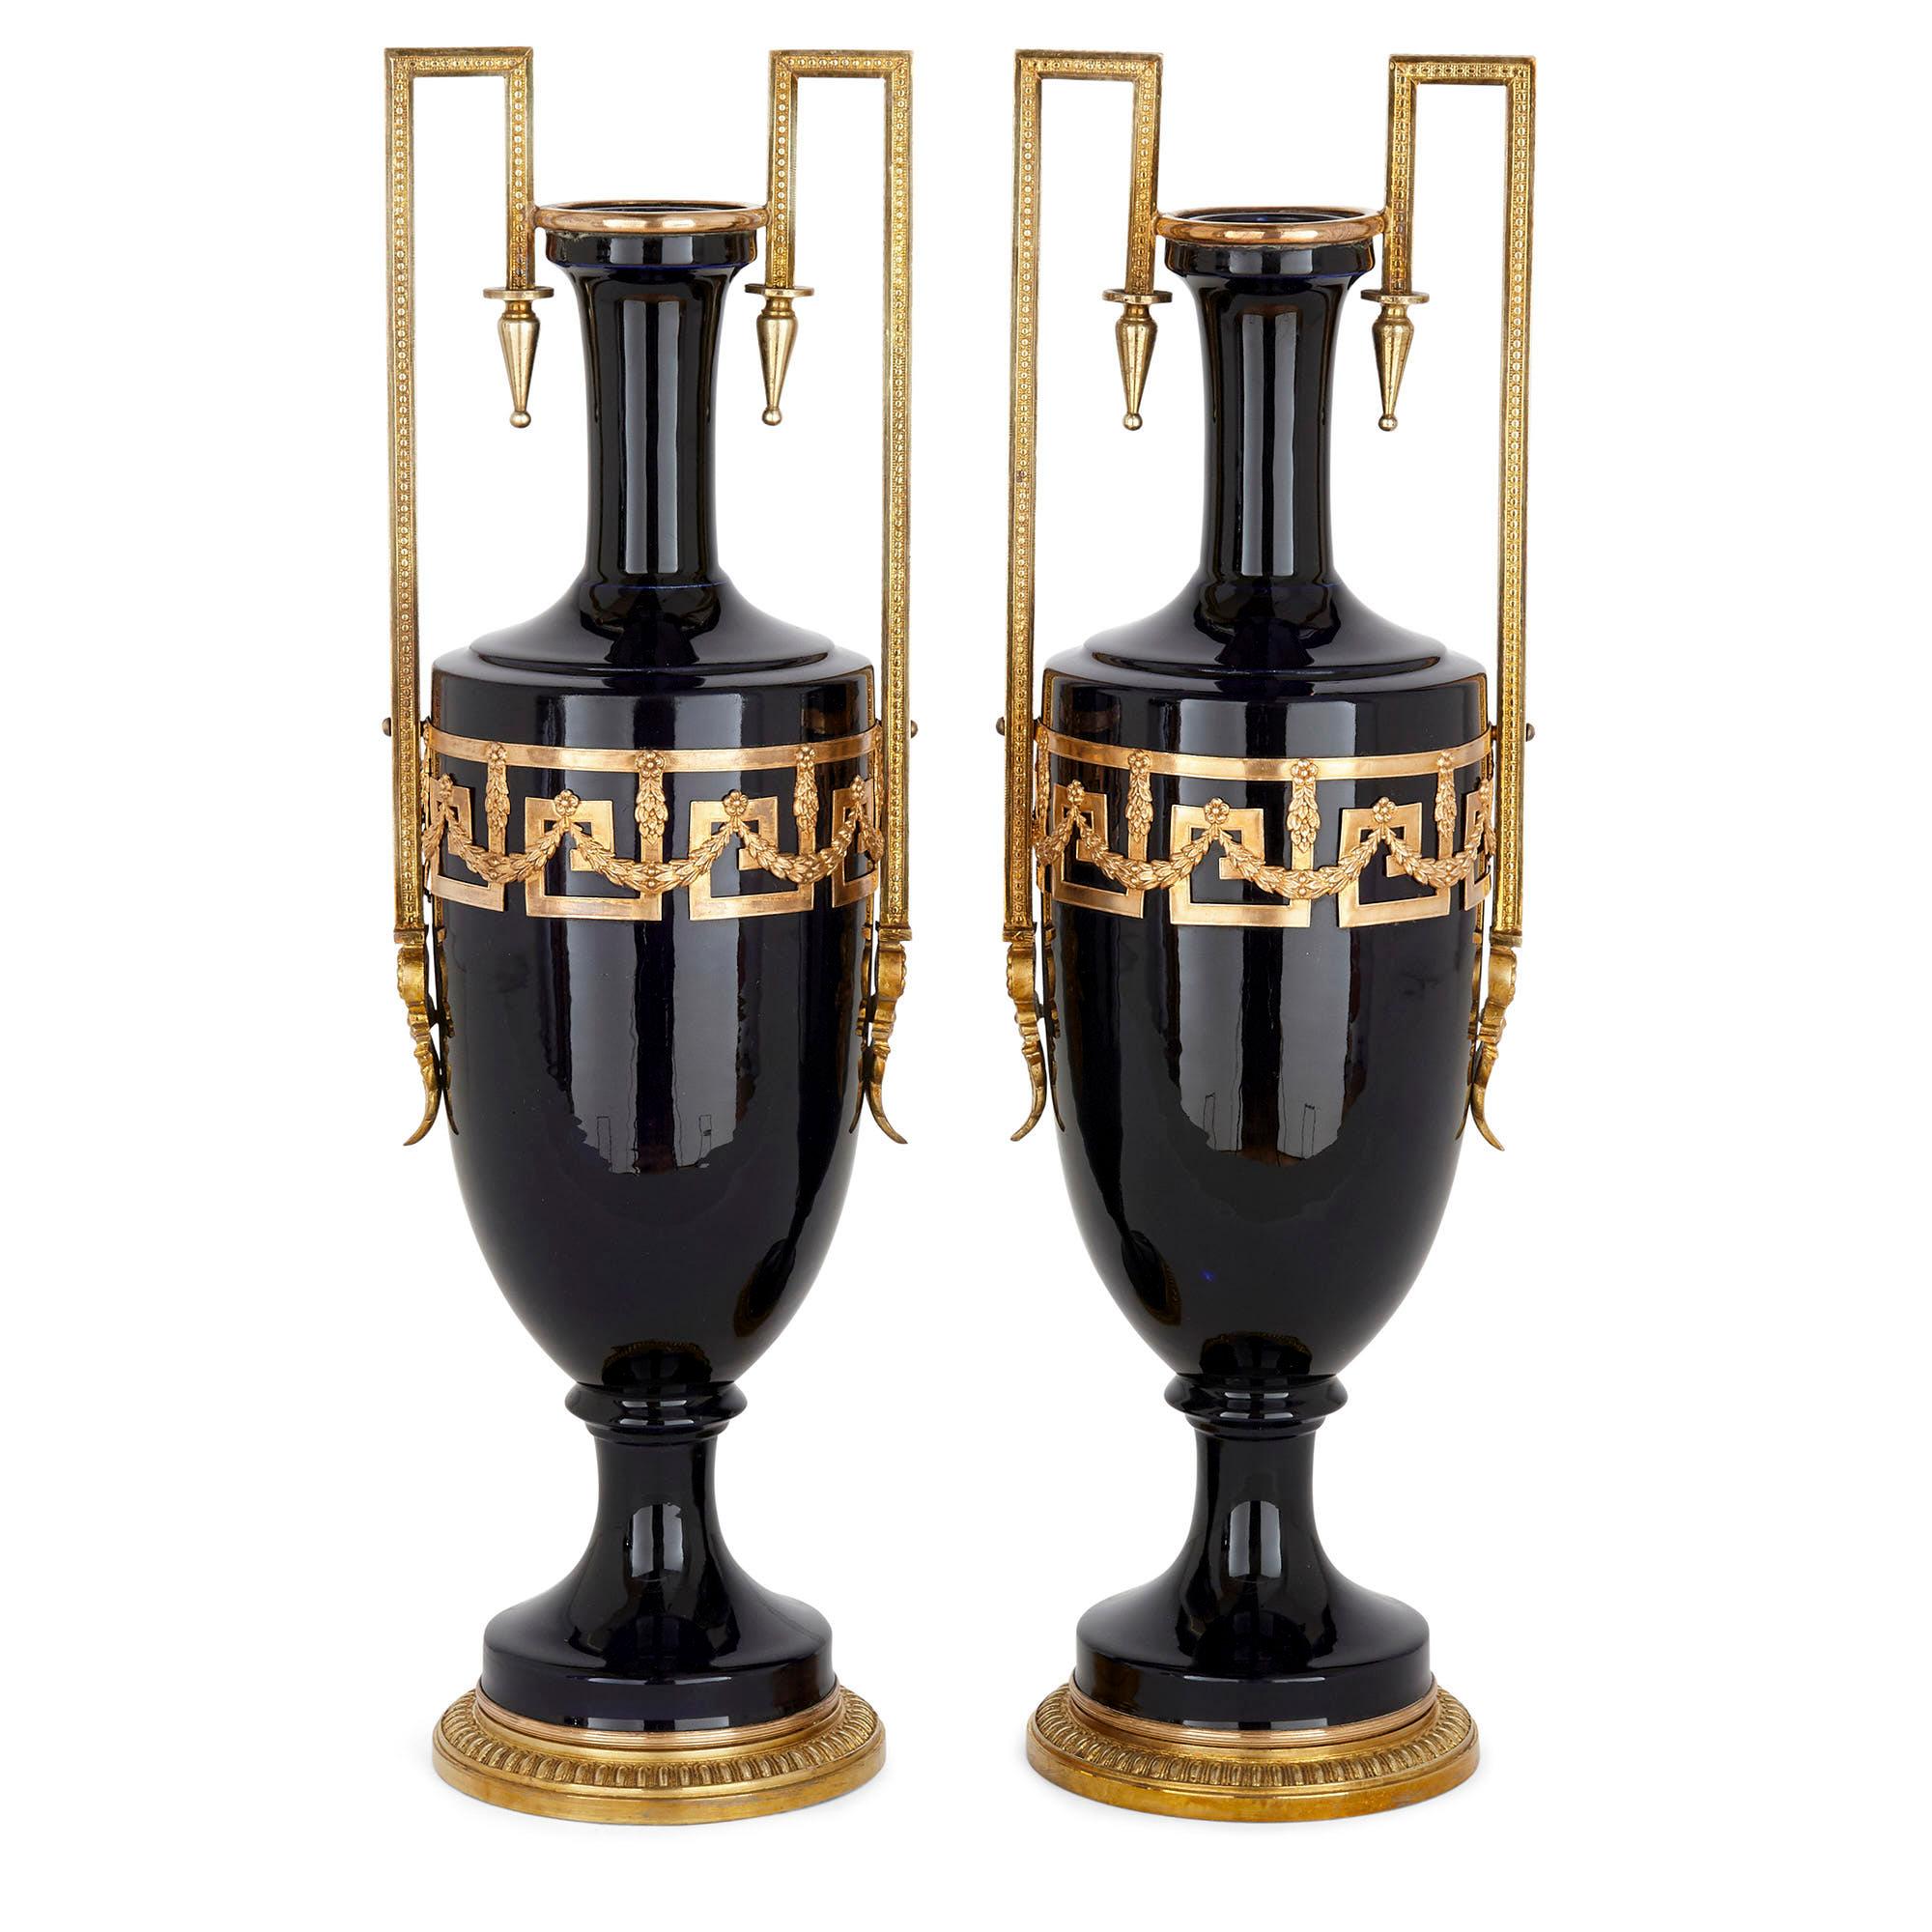 Pair of antique neoclassical style faience and gilt metal vases
French, circa 1900
Measures: Height 48cm, width 15cm, depth 12cm

These fine blue faience and gilt metal vases might take stylistic inspiration from the vases of Ancient Greece, but